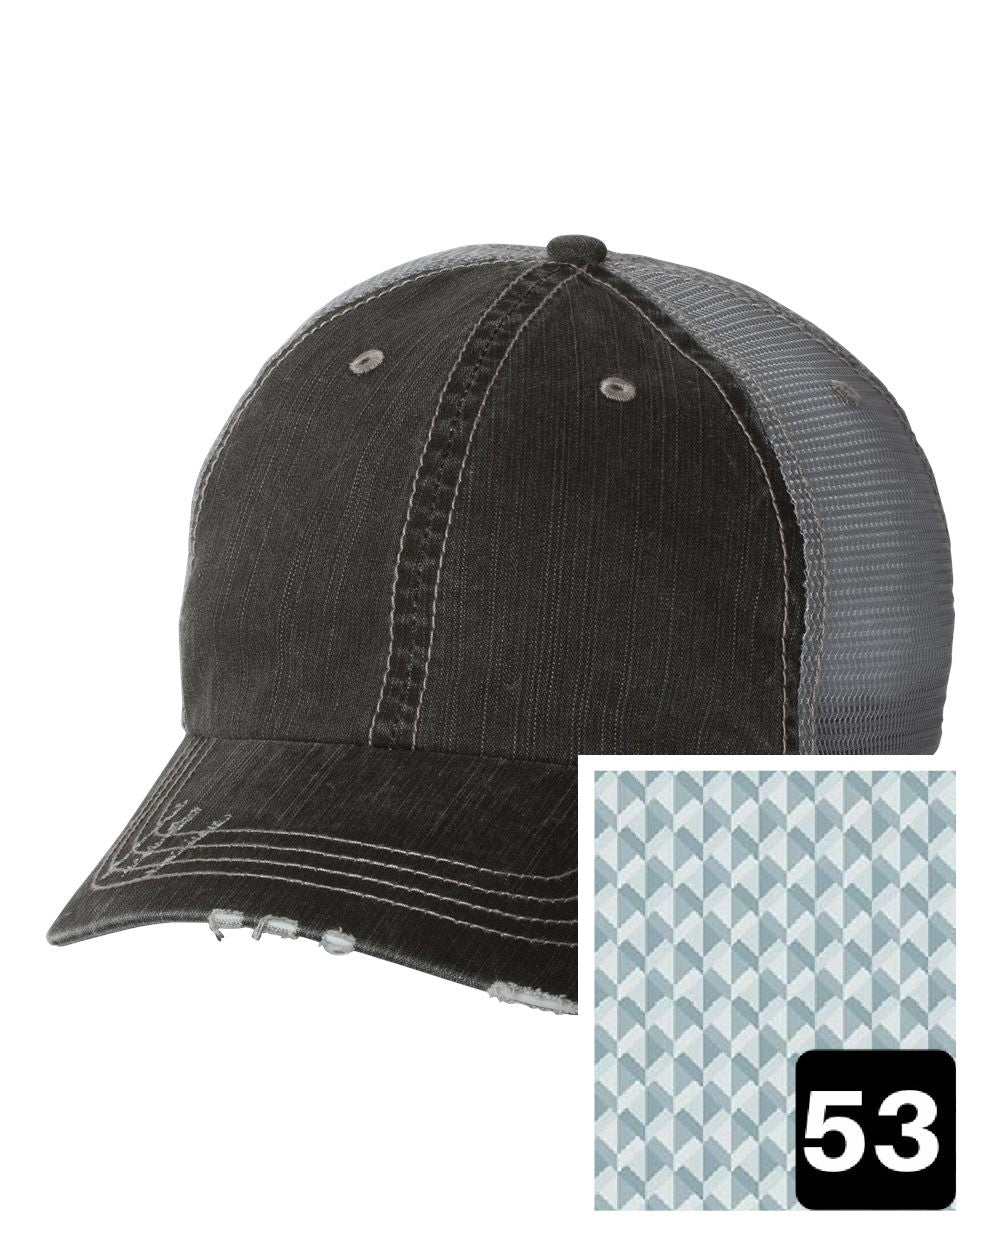 gray distressed trucker hat with multi-color stripe fabric state of New Mexico